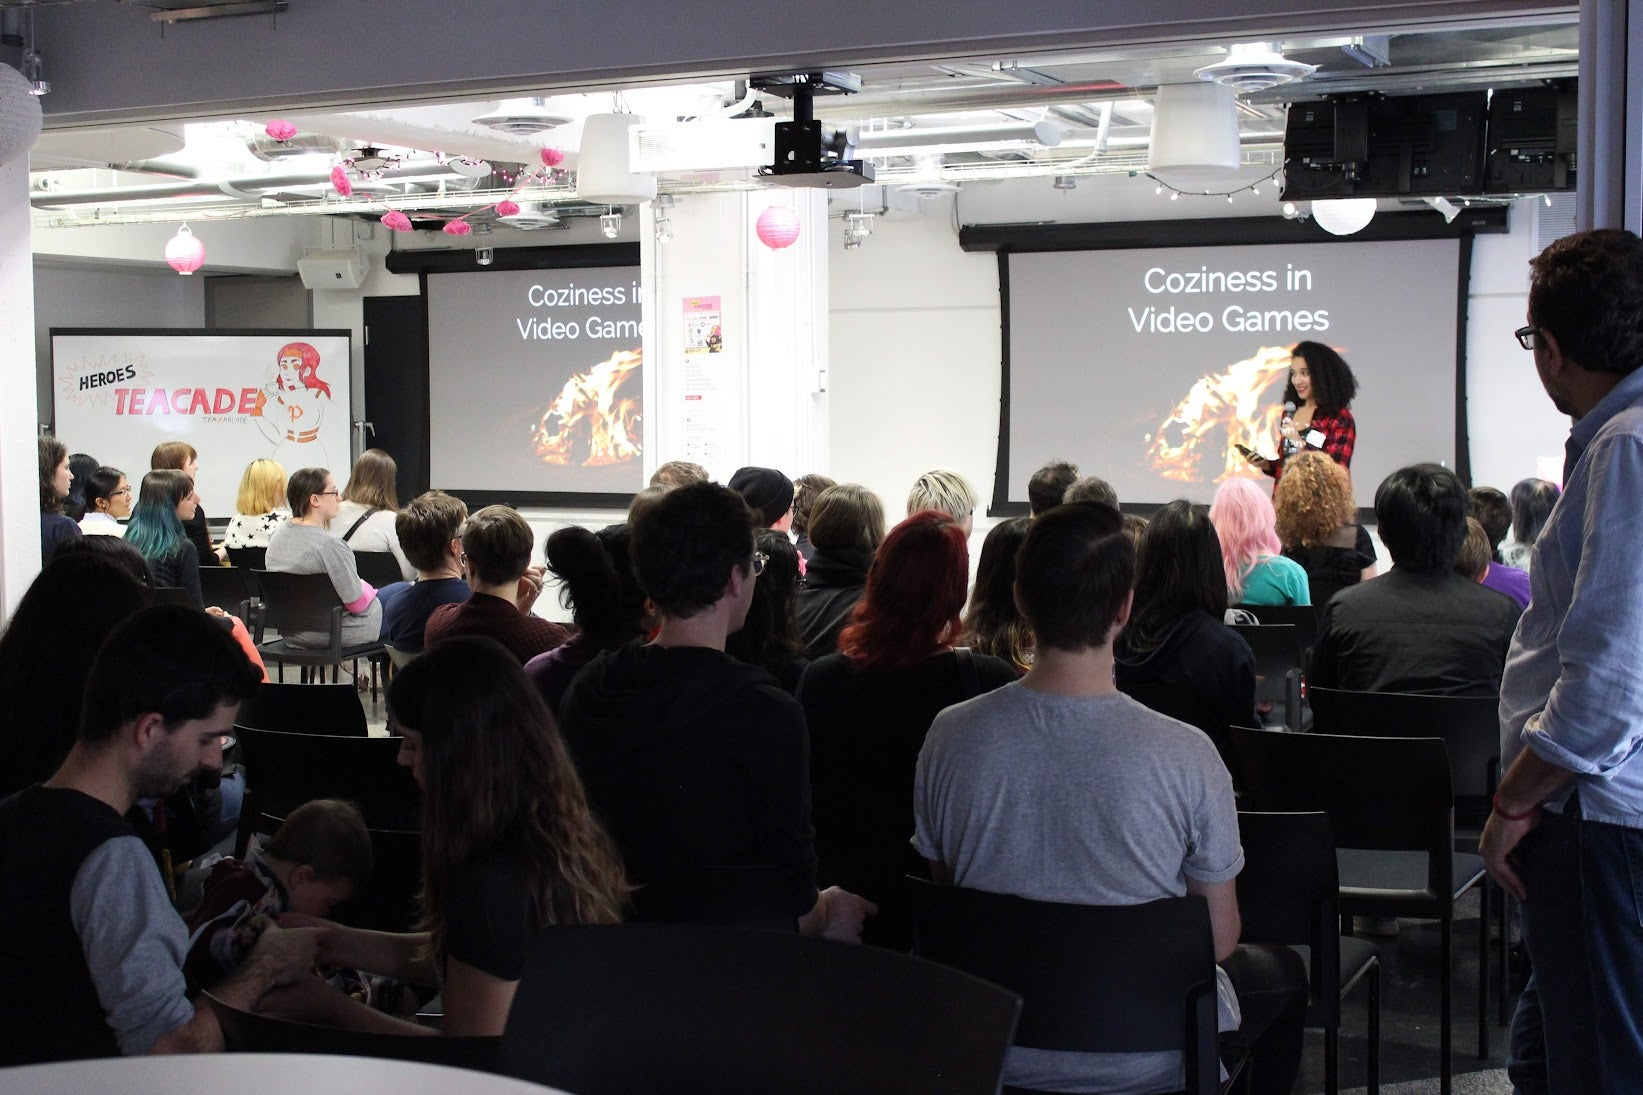 A woman gives a presentation on "Coziness in Video Games" to a crowded room at a Pixelles event